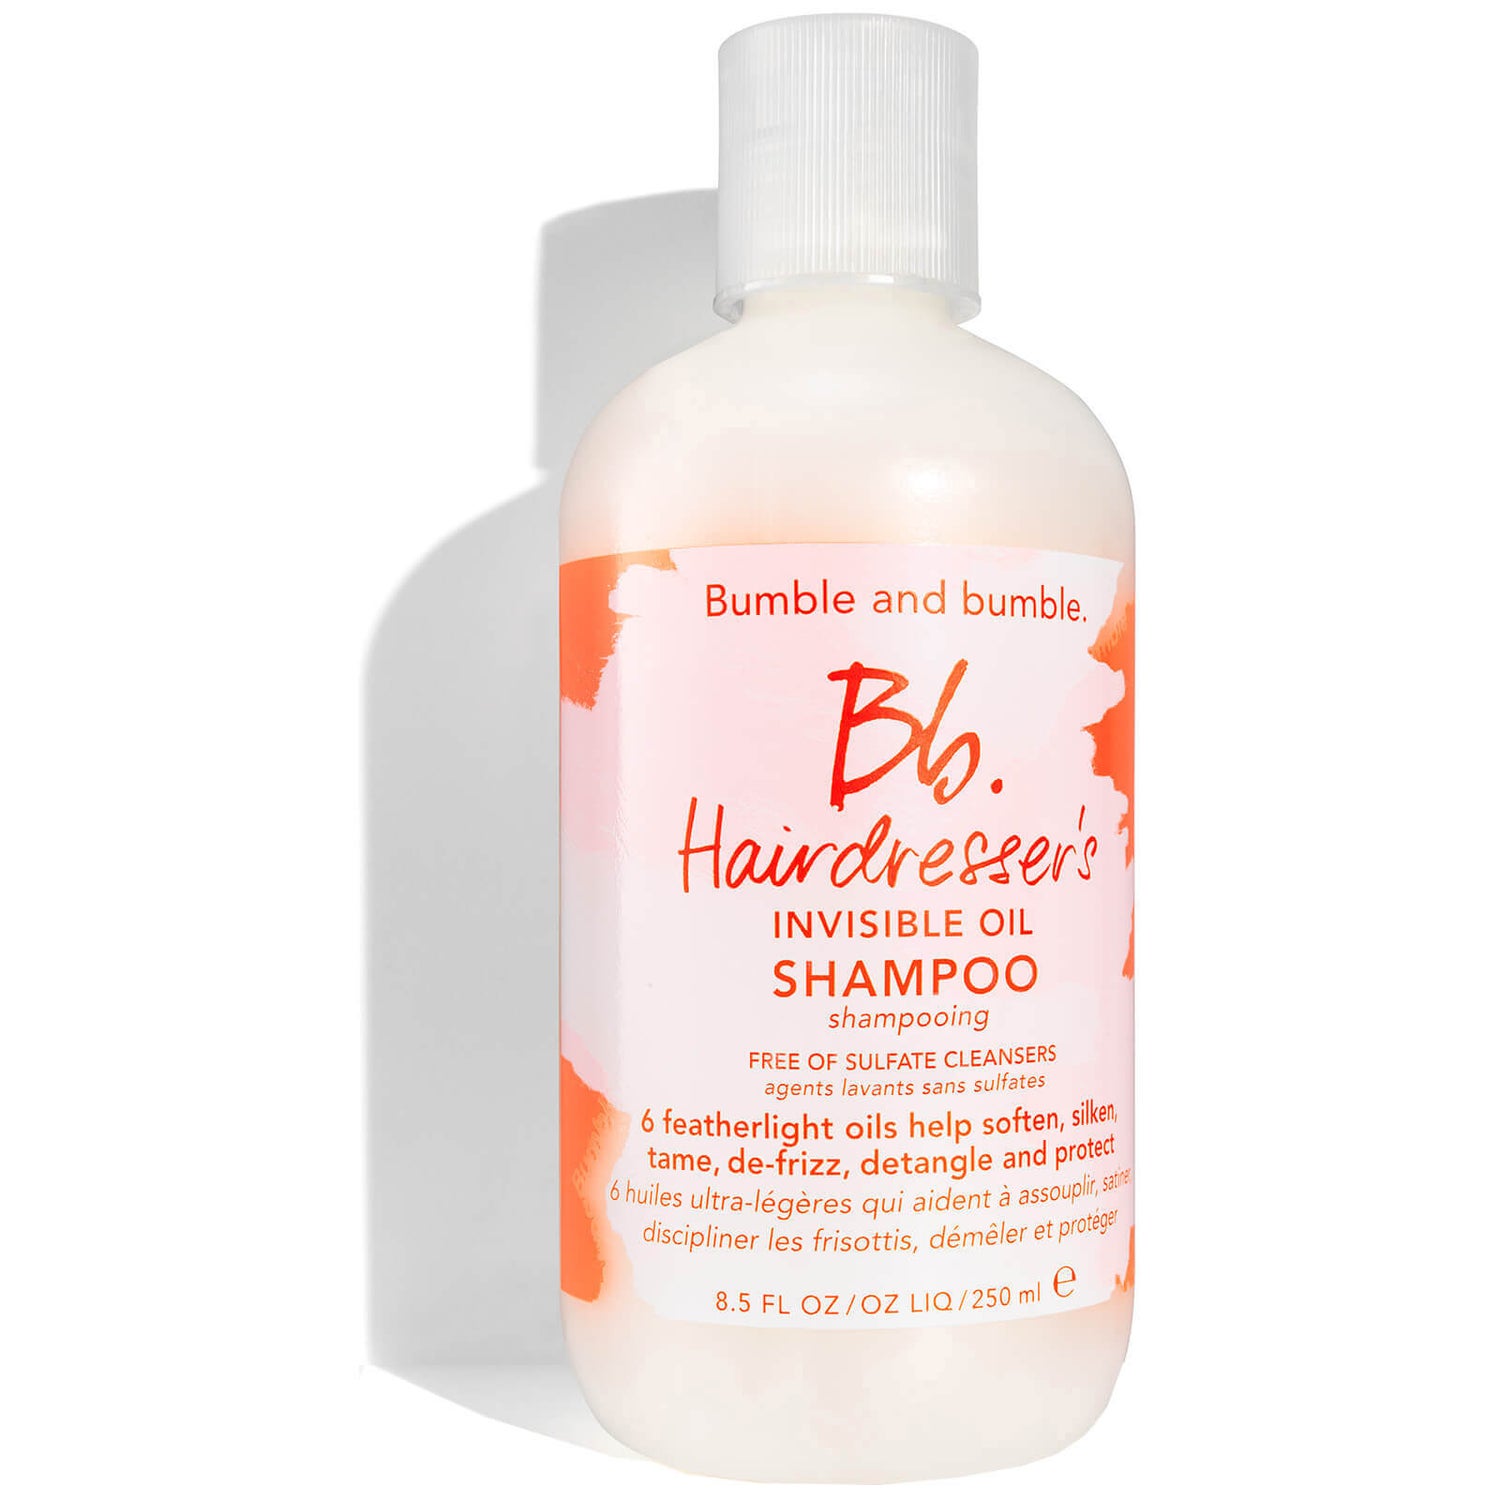 Champô Hairdresser's Invisible Oil, sem sulfatos, da Bumble and bumble  250ml